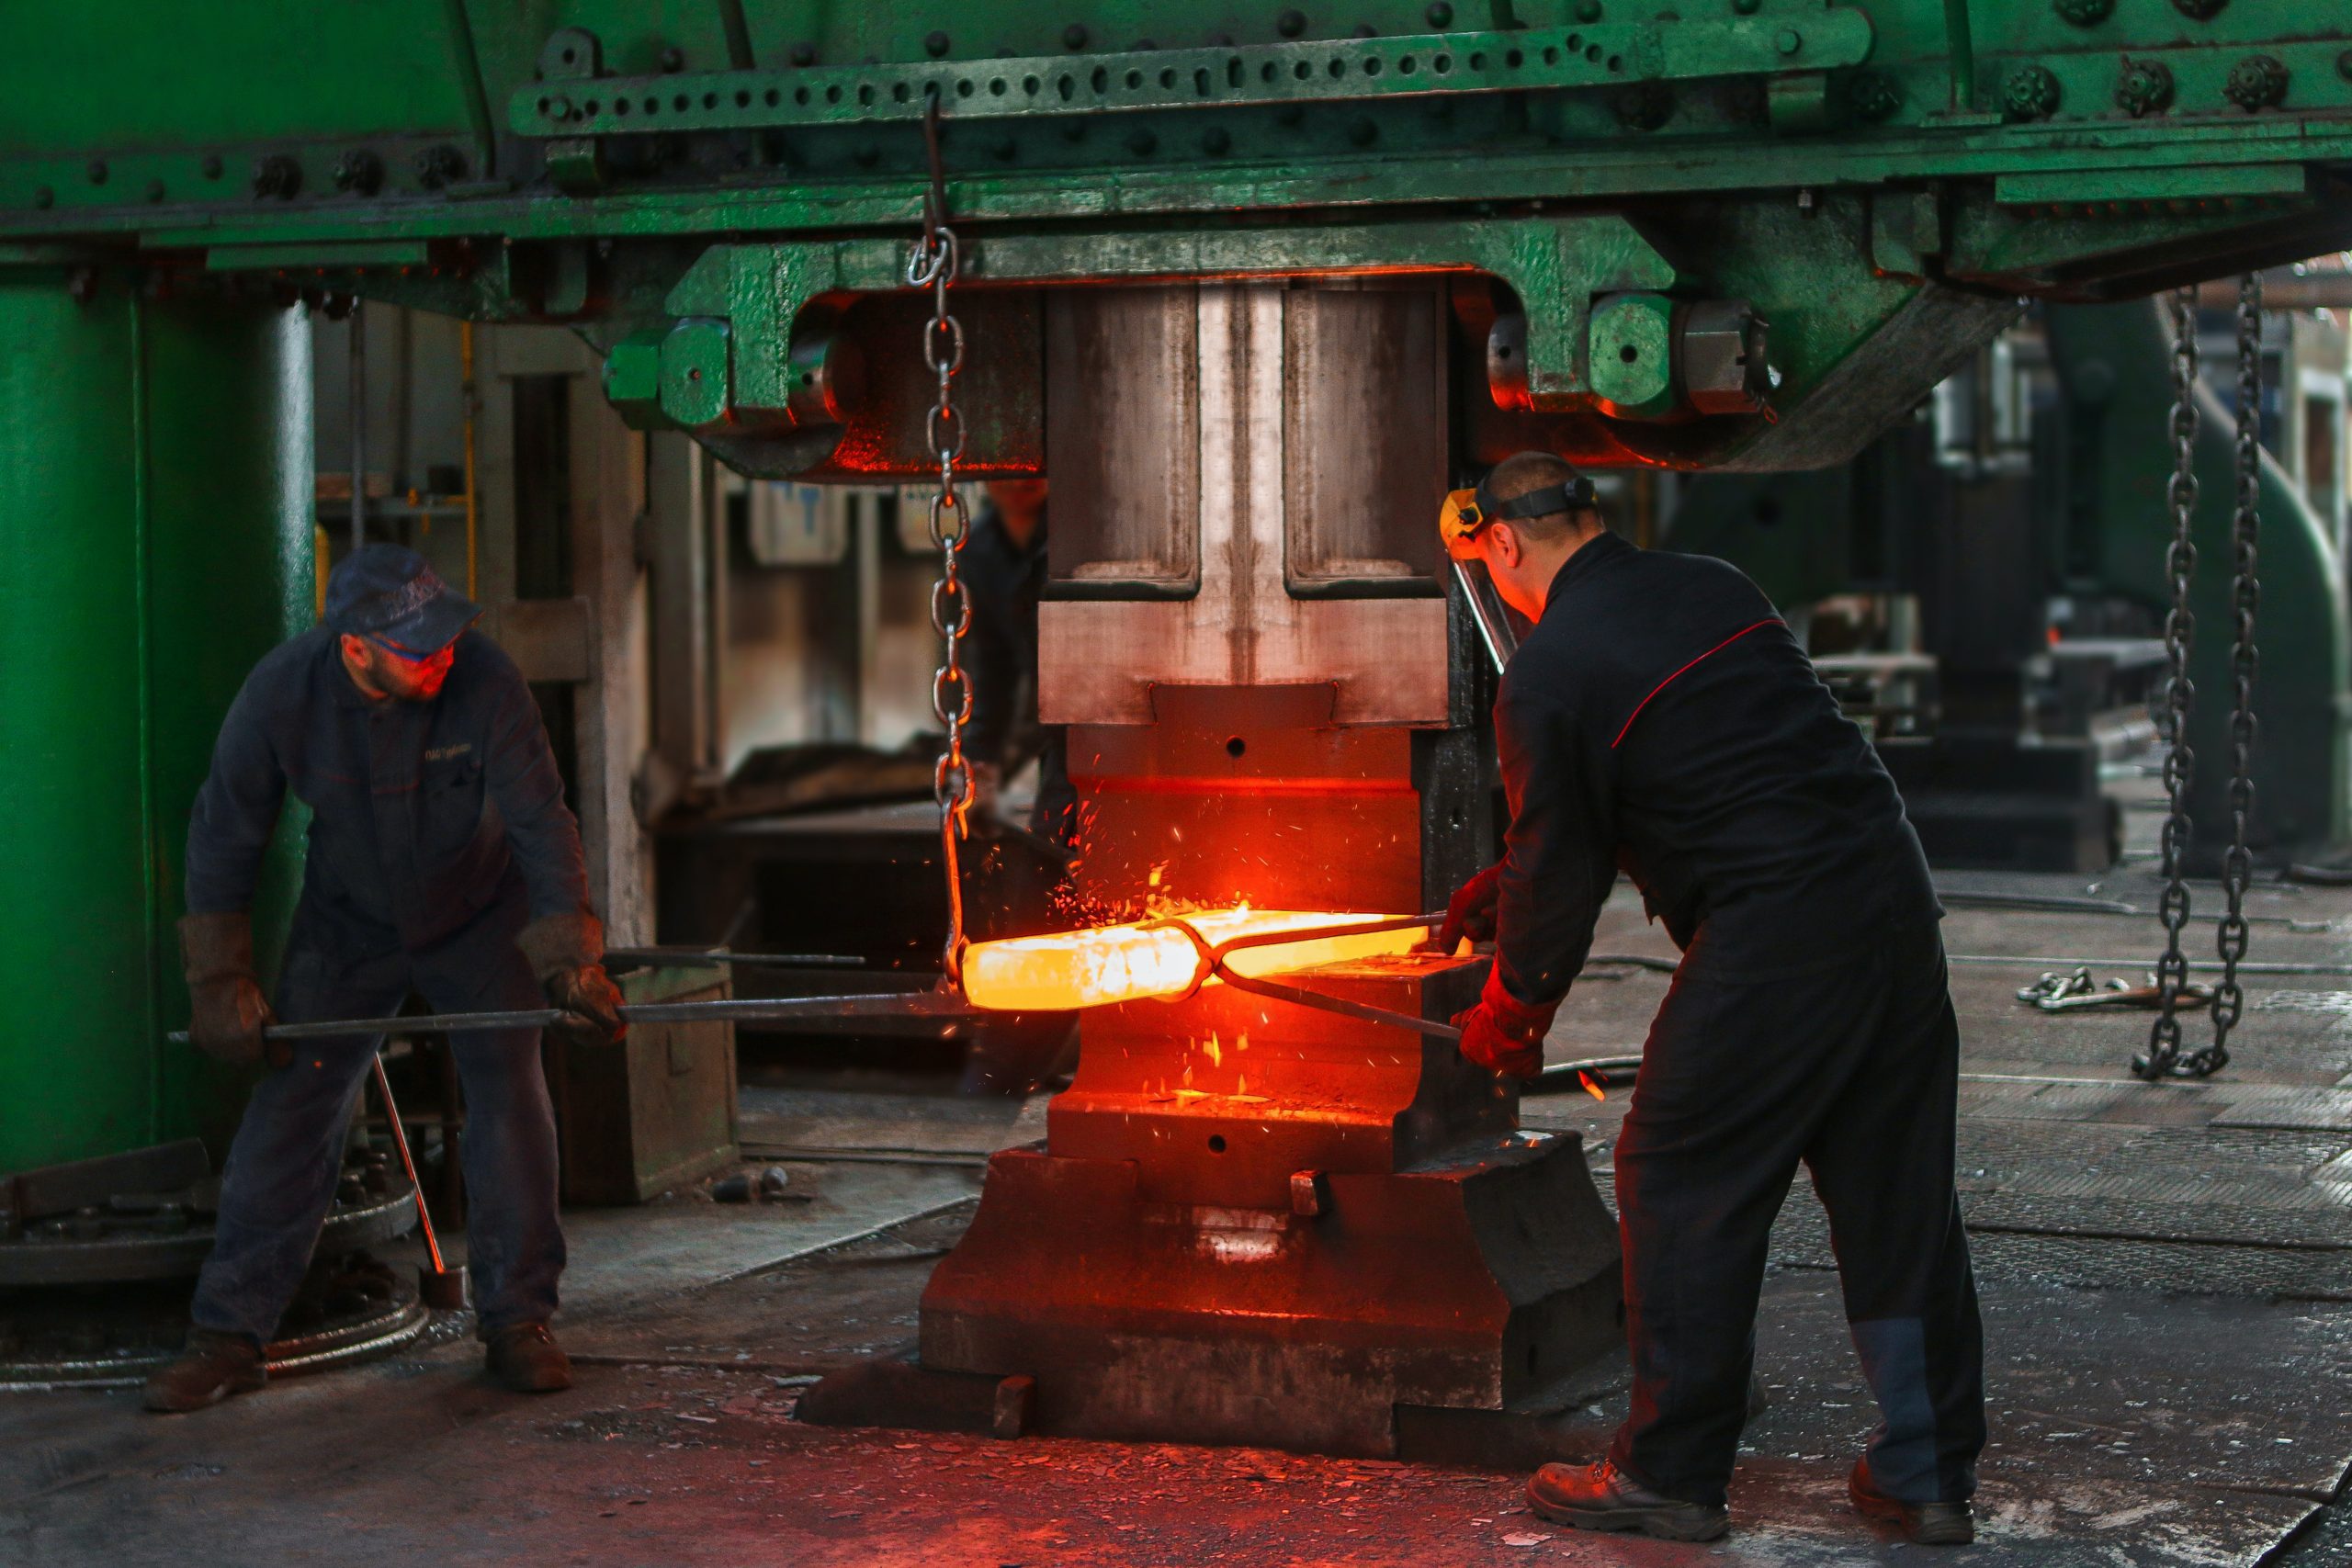 How to Choose Promising Suppliers to Get Hands on Best Steel Supplies? 31